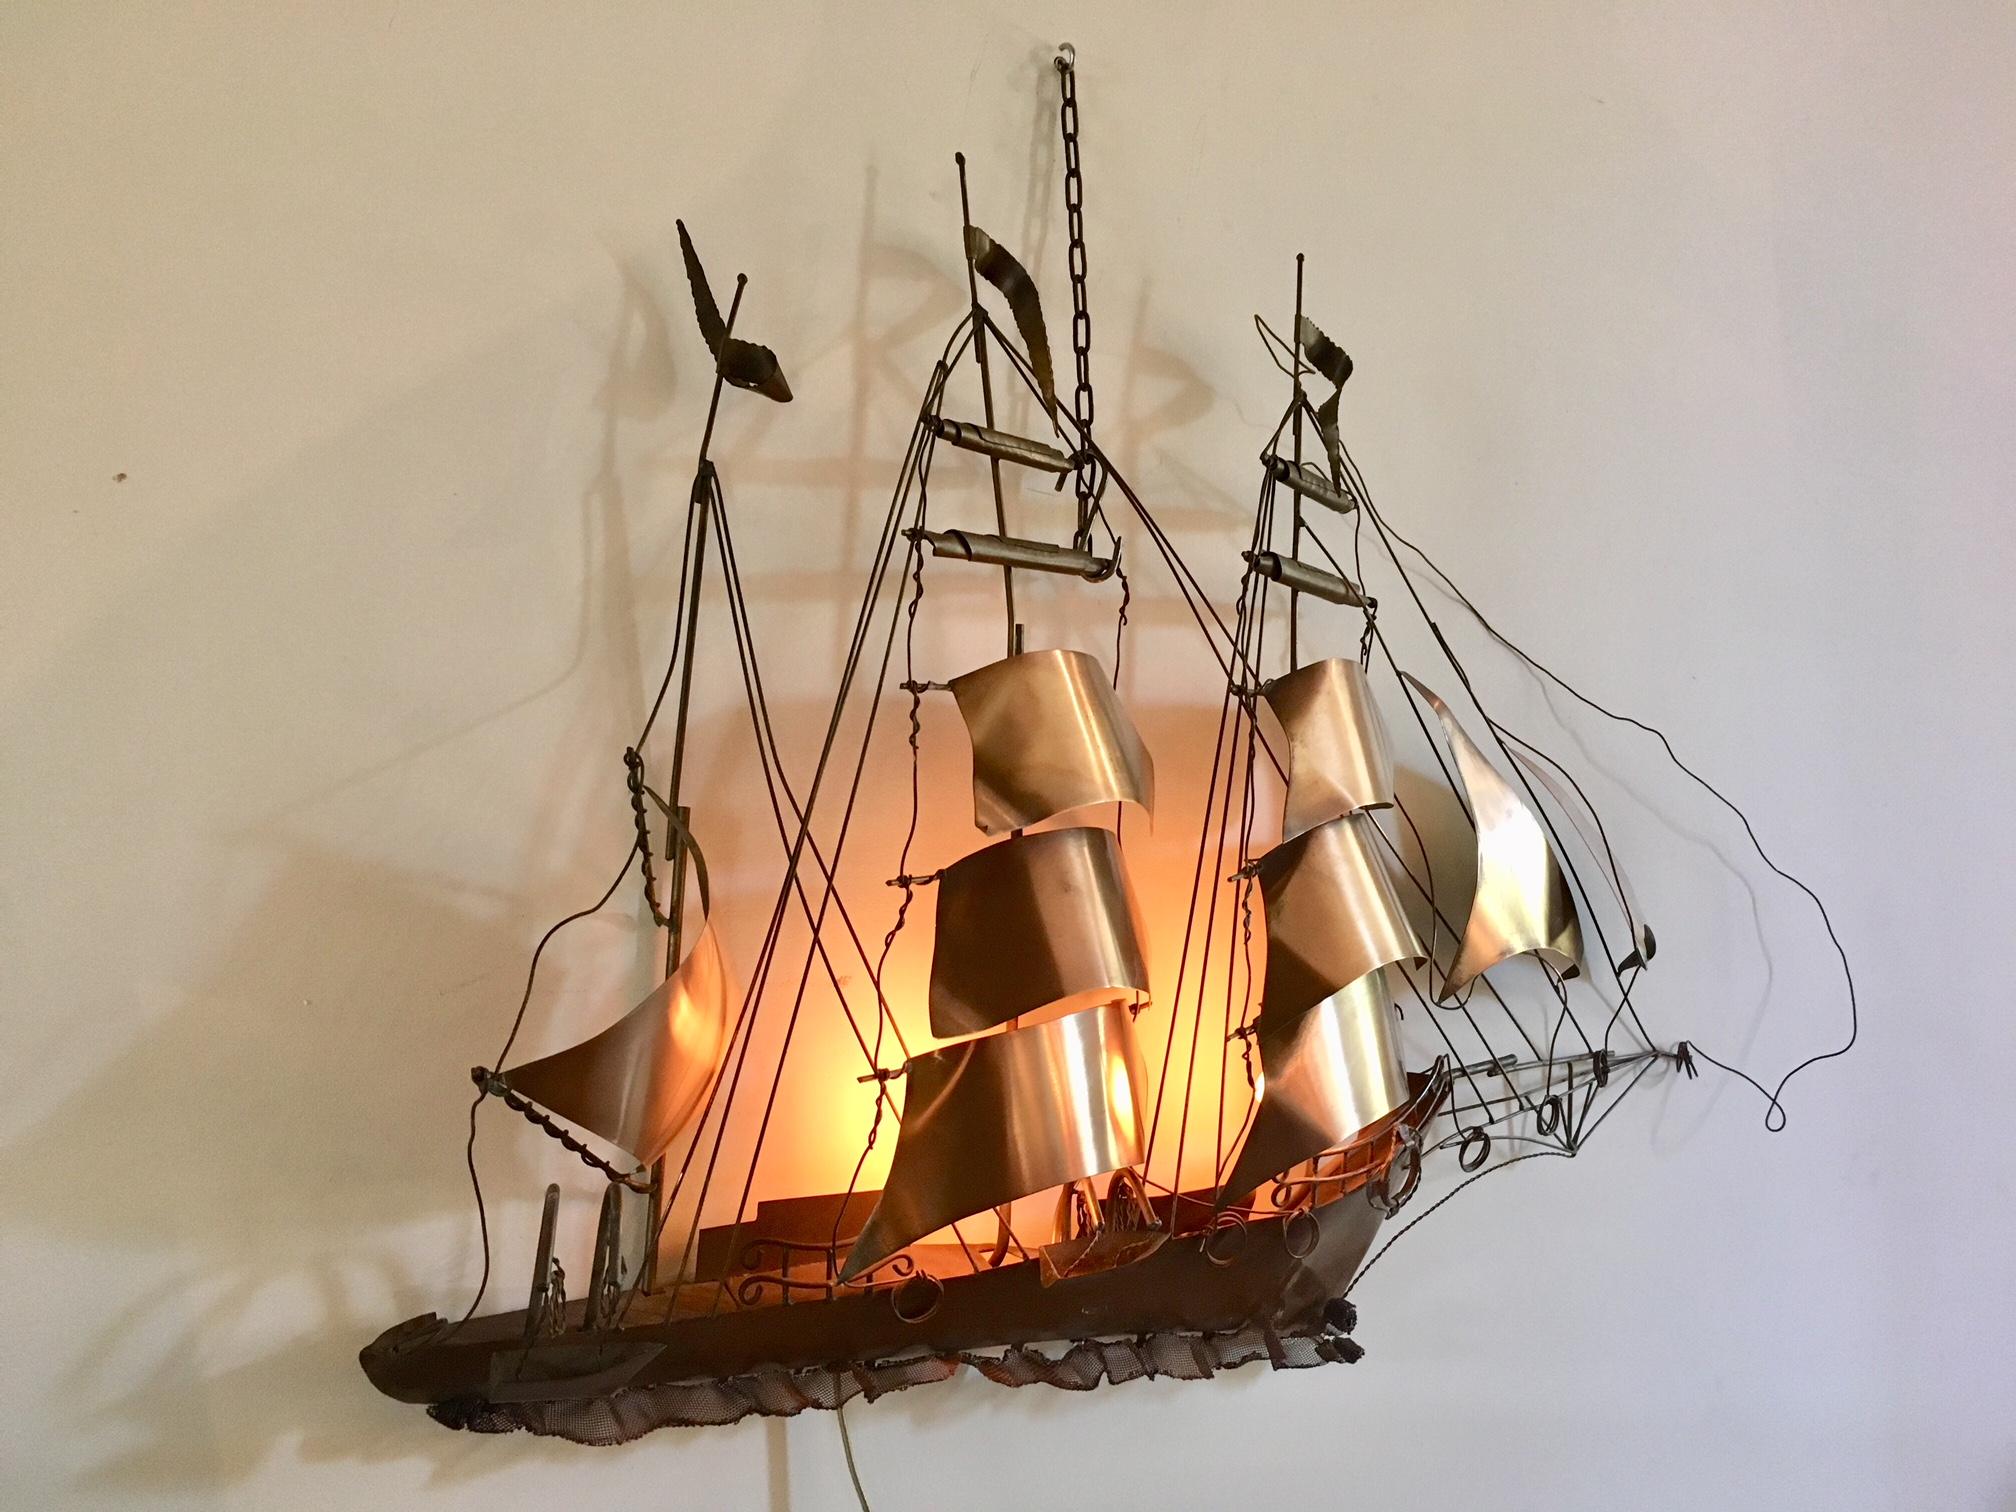 Mid-Century Modern Sailing Boat Wall Light or Sculpture by Daniel d'Haeseleer In Good Condition For Sale In Baambrugge, NL